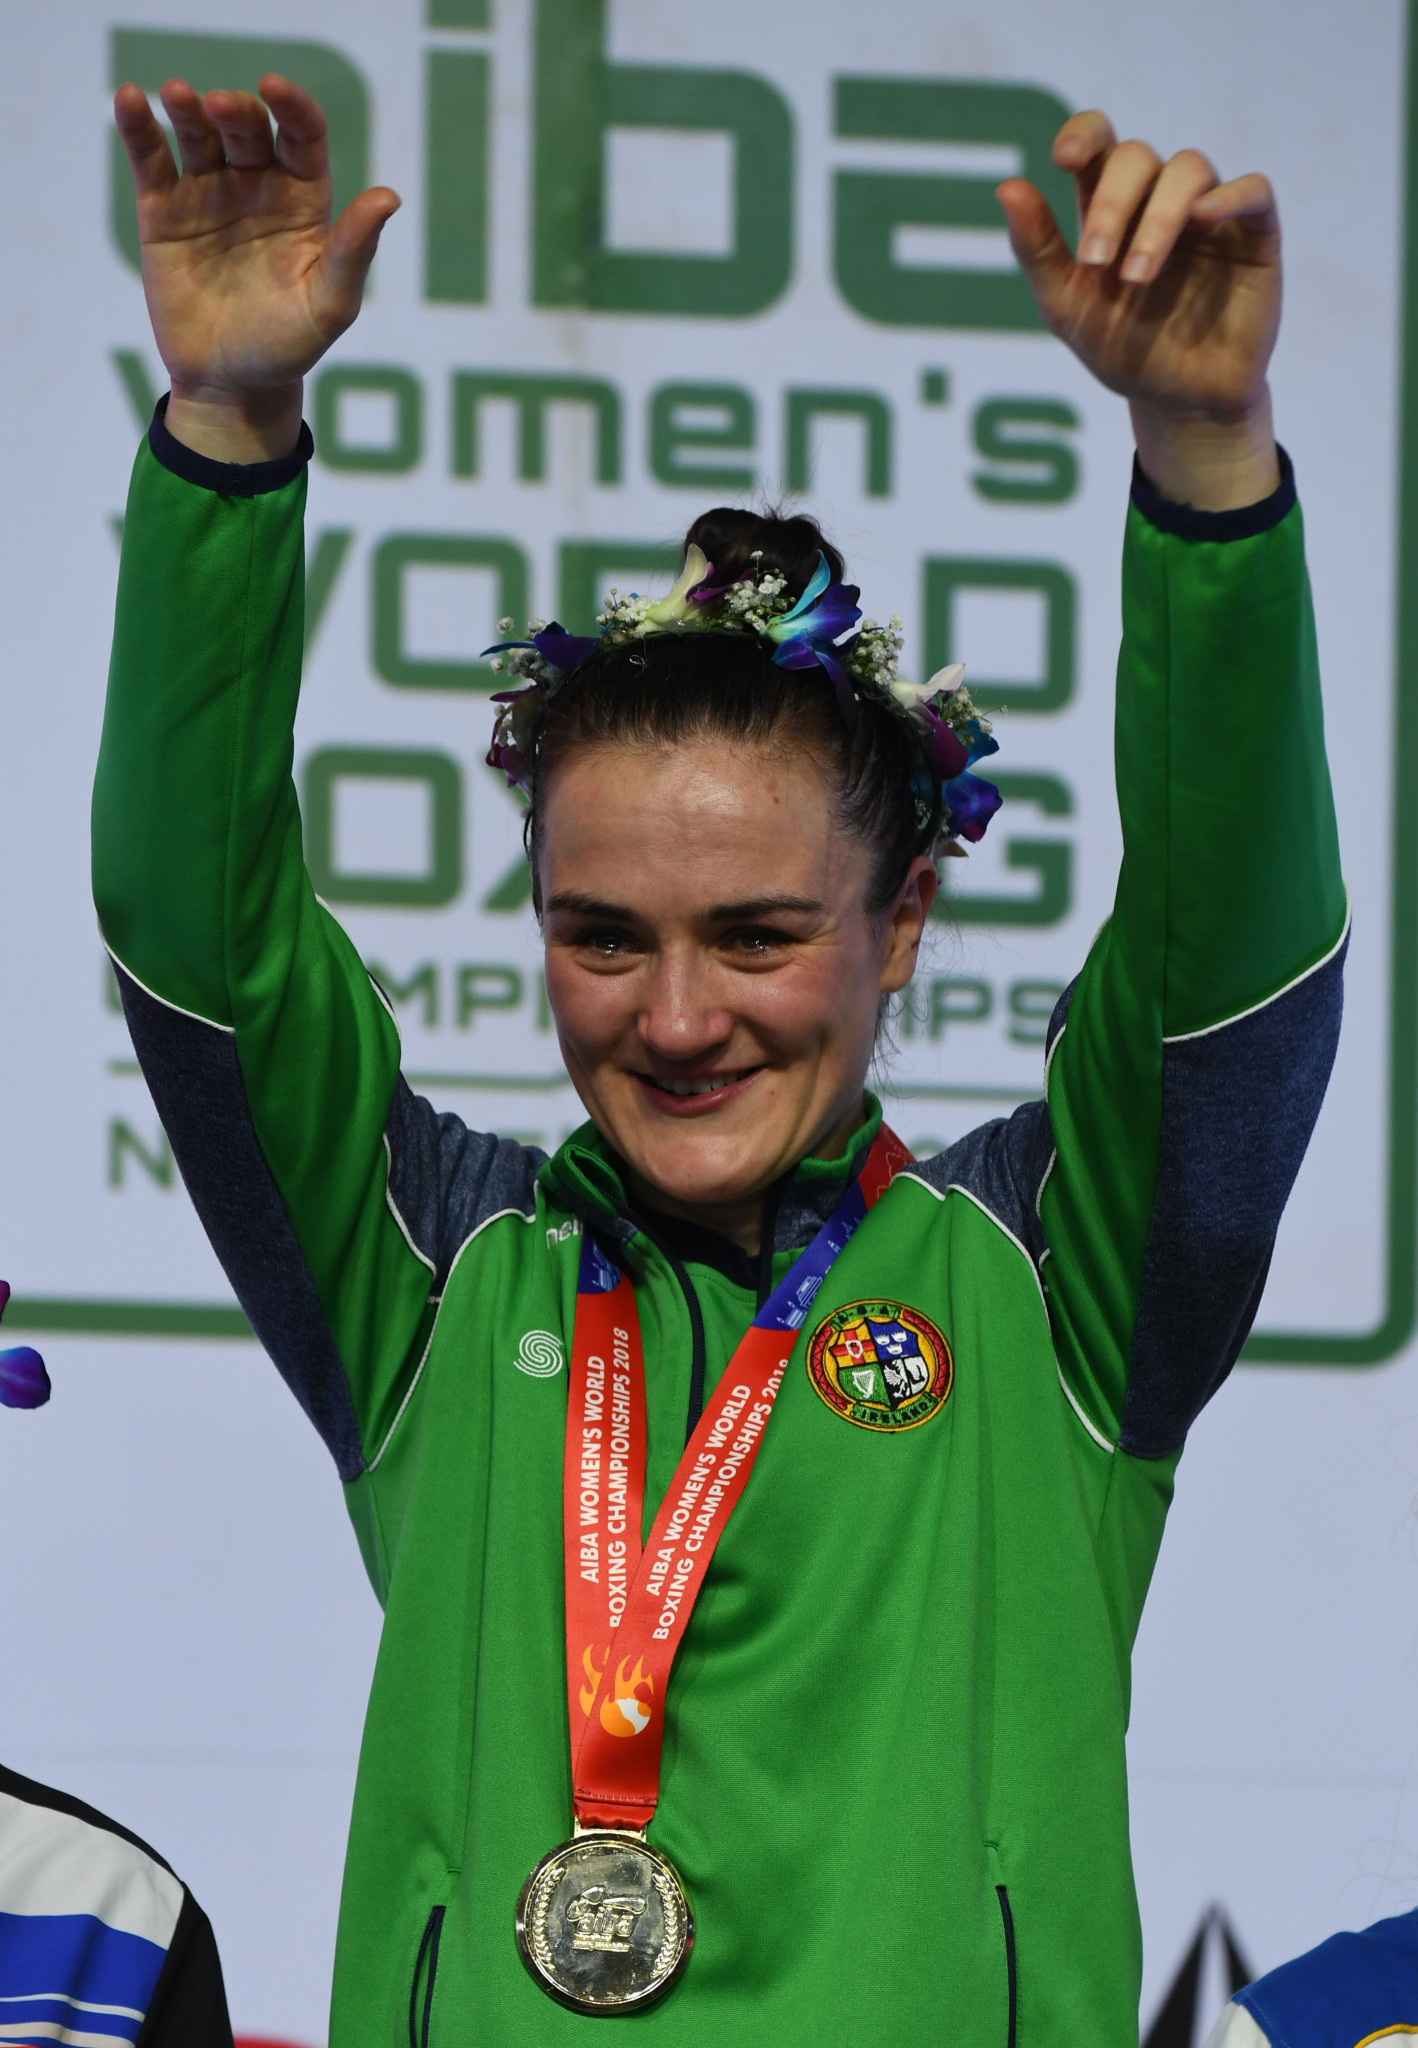 Kellie Harrington earned lightweight gold at the 2018 World Boxing Championships in New Delhi ©Getty Images